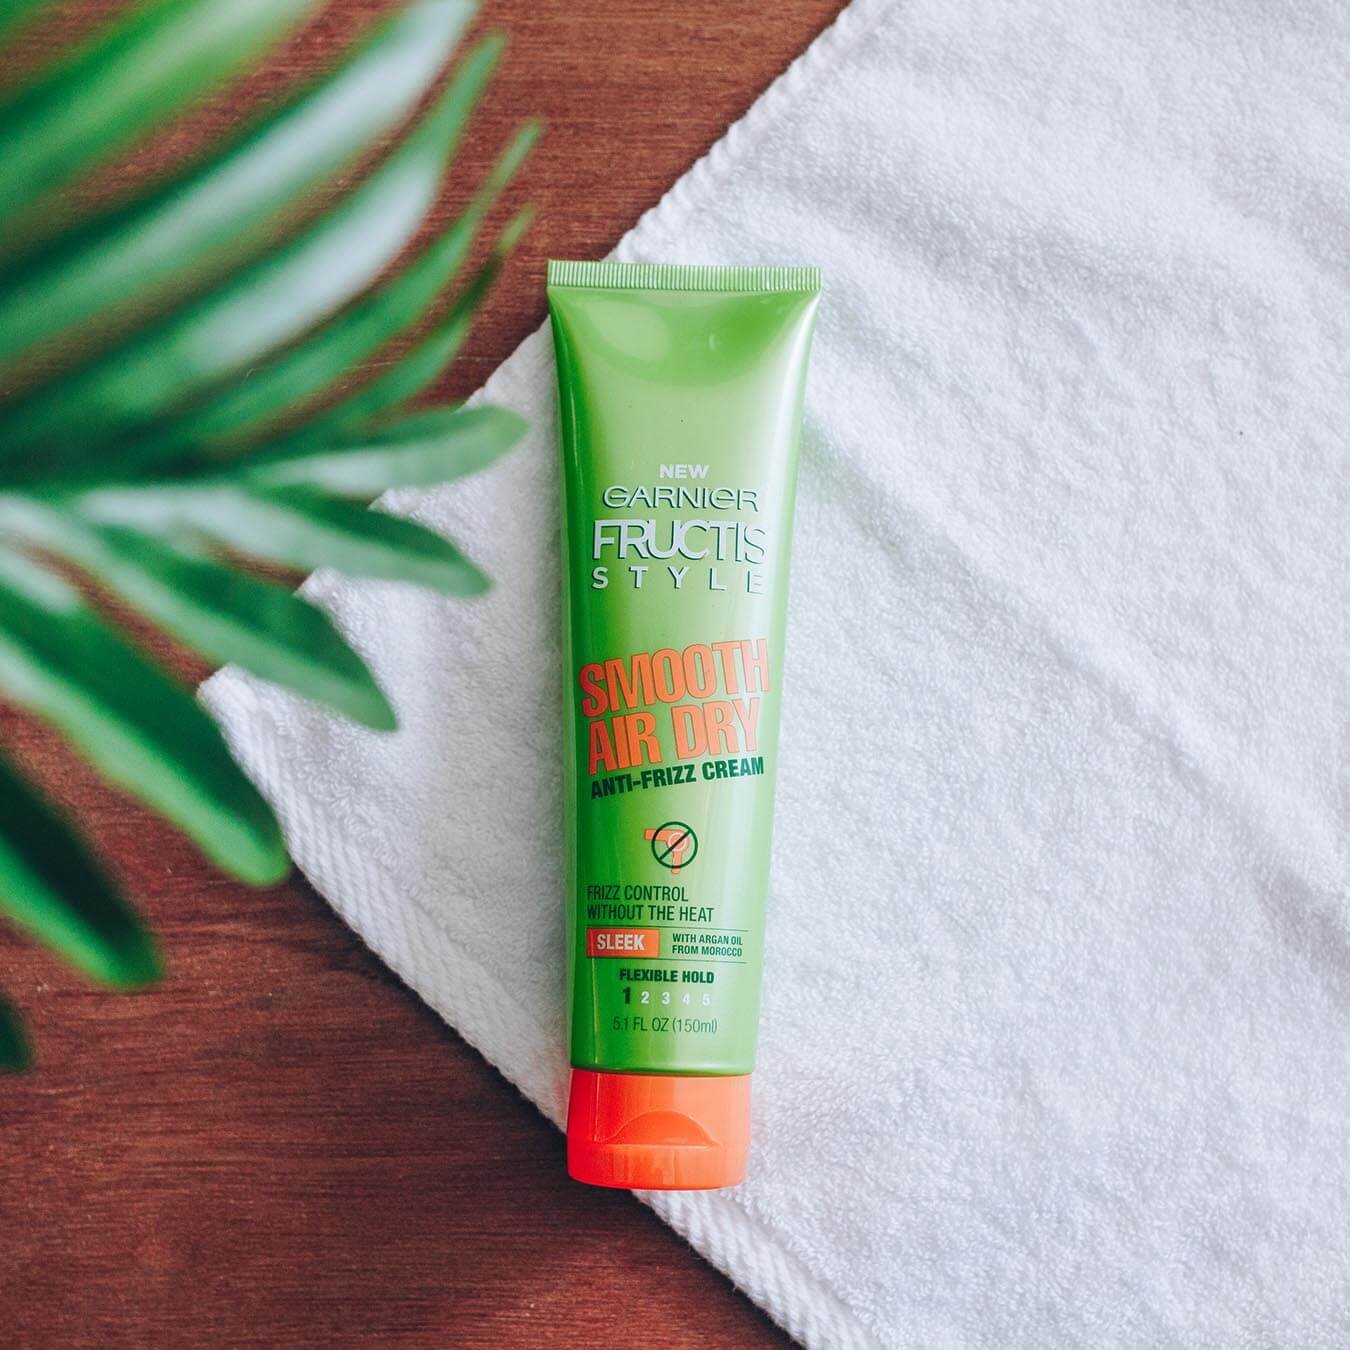 Garnier Fructis Style Smooth Air Dry Anti-Frizz Cream on a white hand towel on wood with a branch of leaves in the foreground.